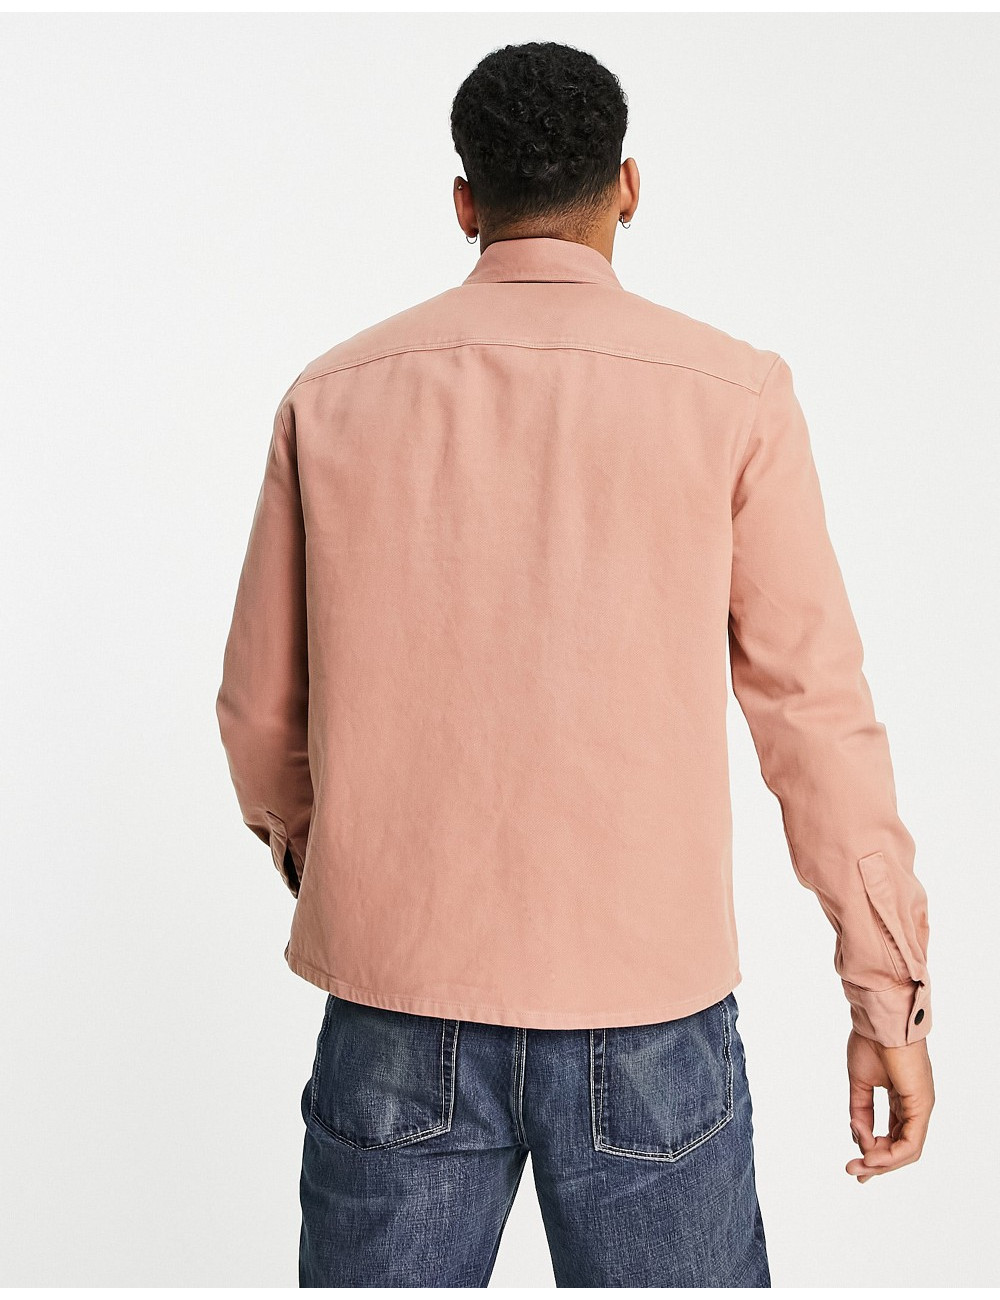 River Island overshirt in pink